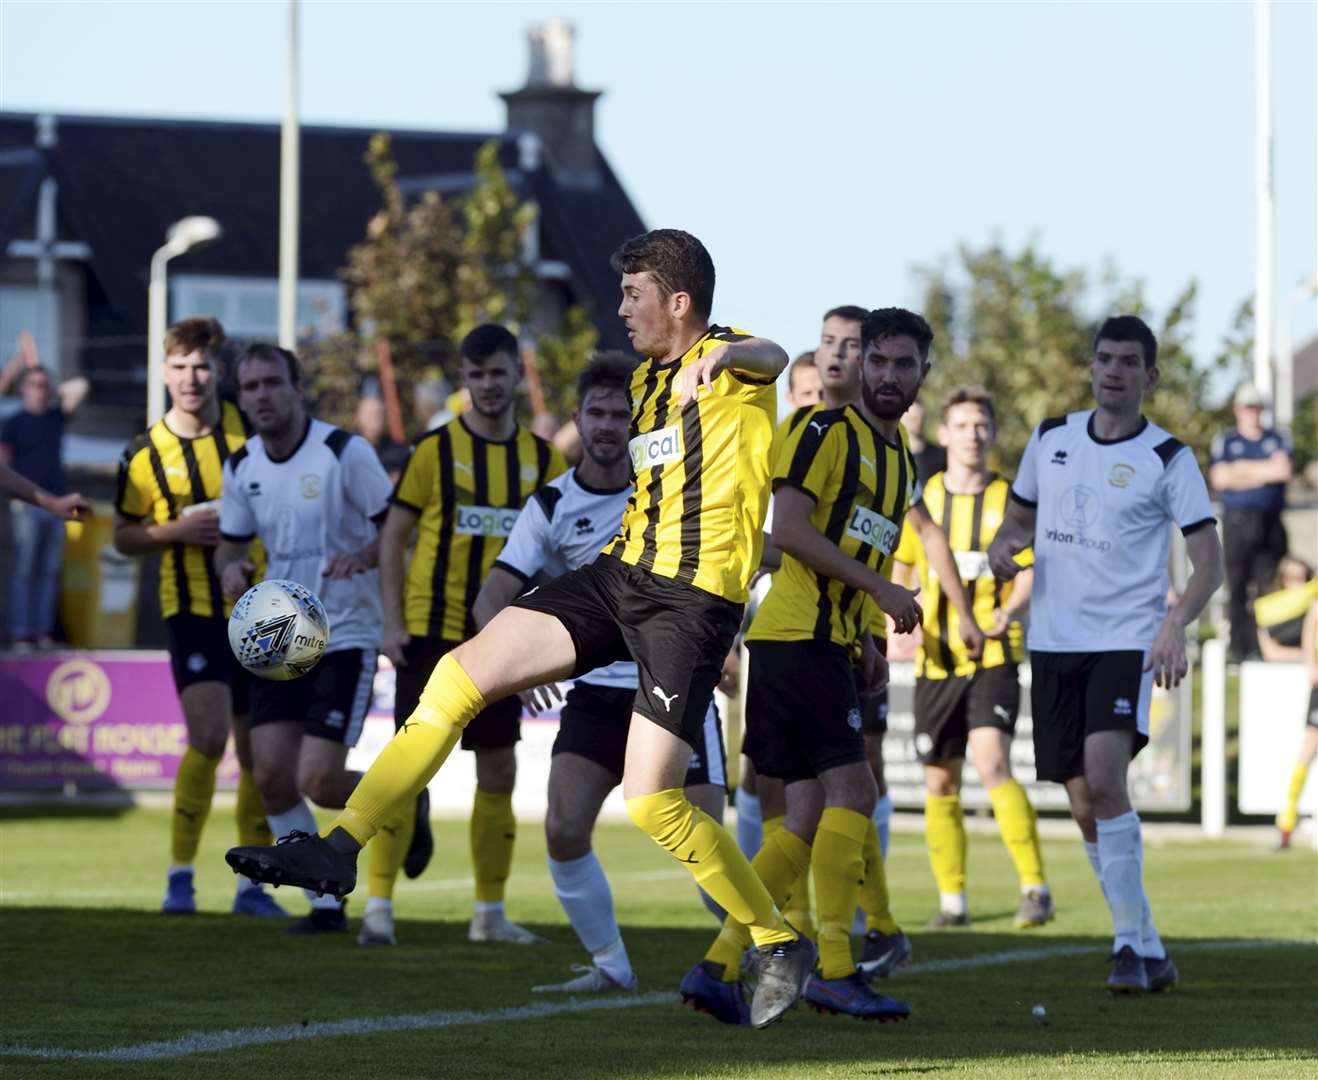 Angus Dey has signed a new deal with Nairn County.